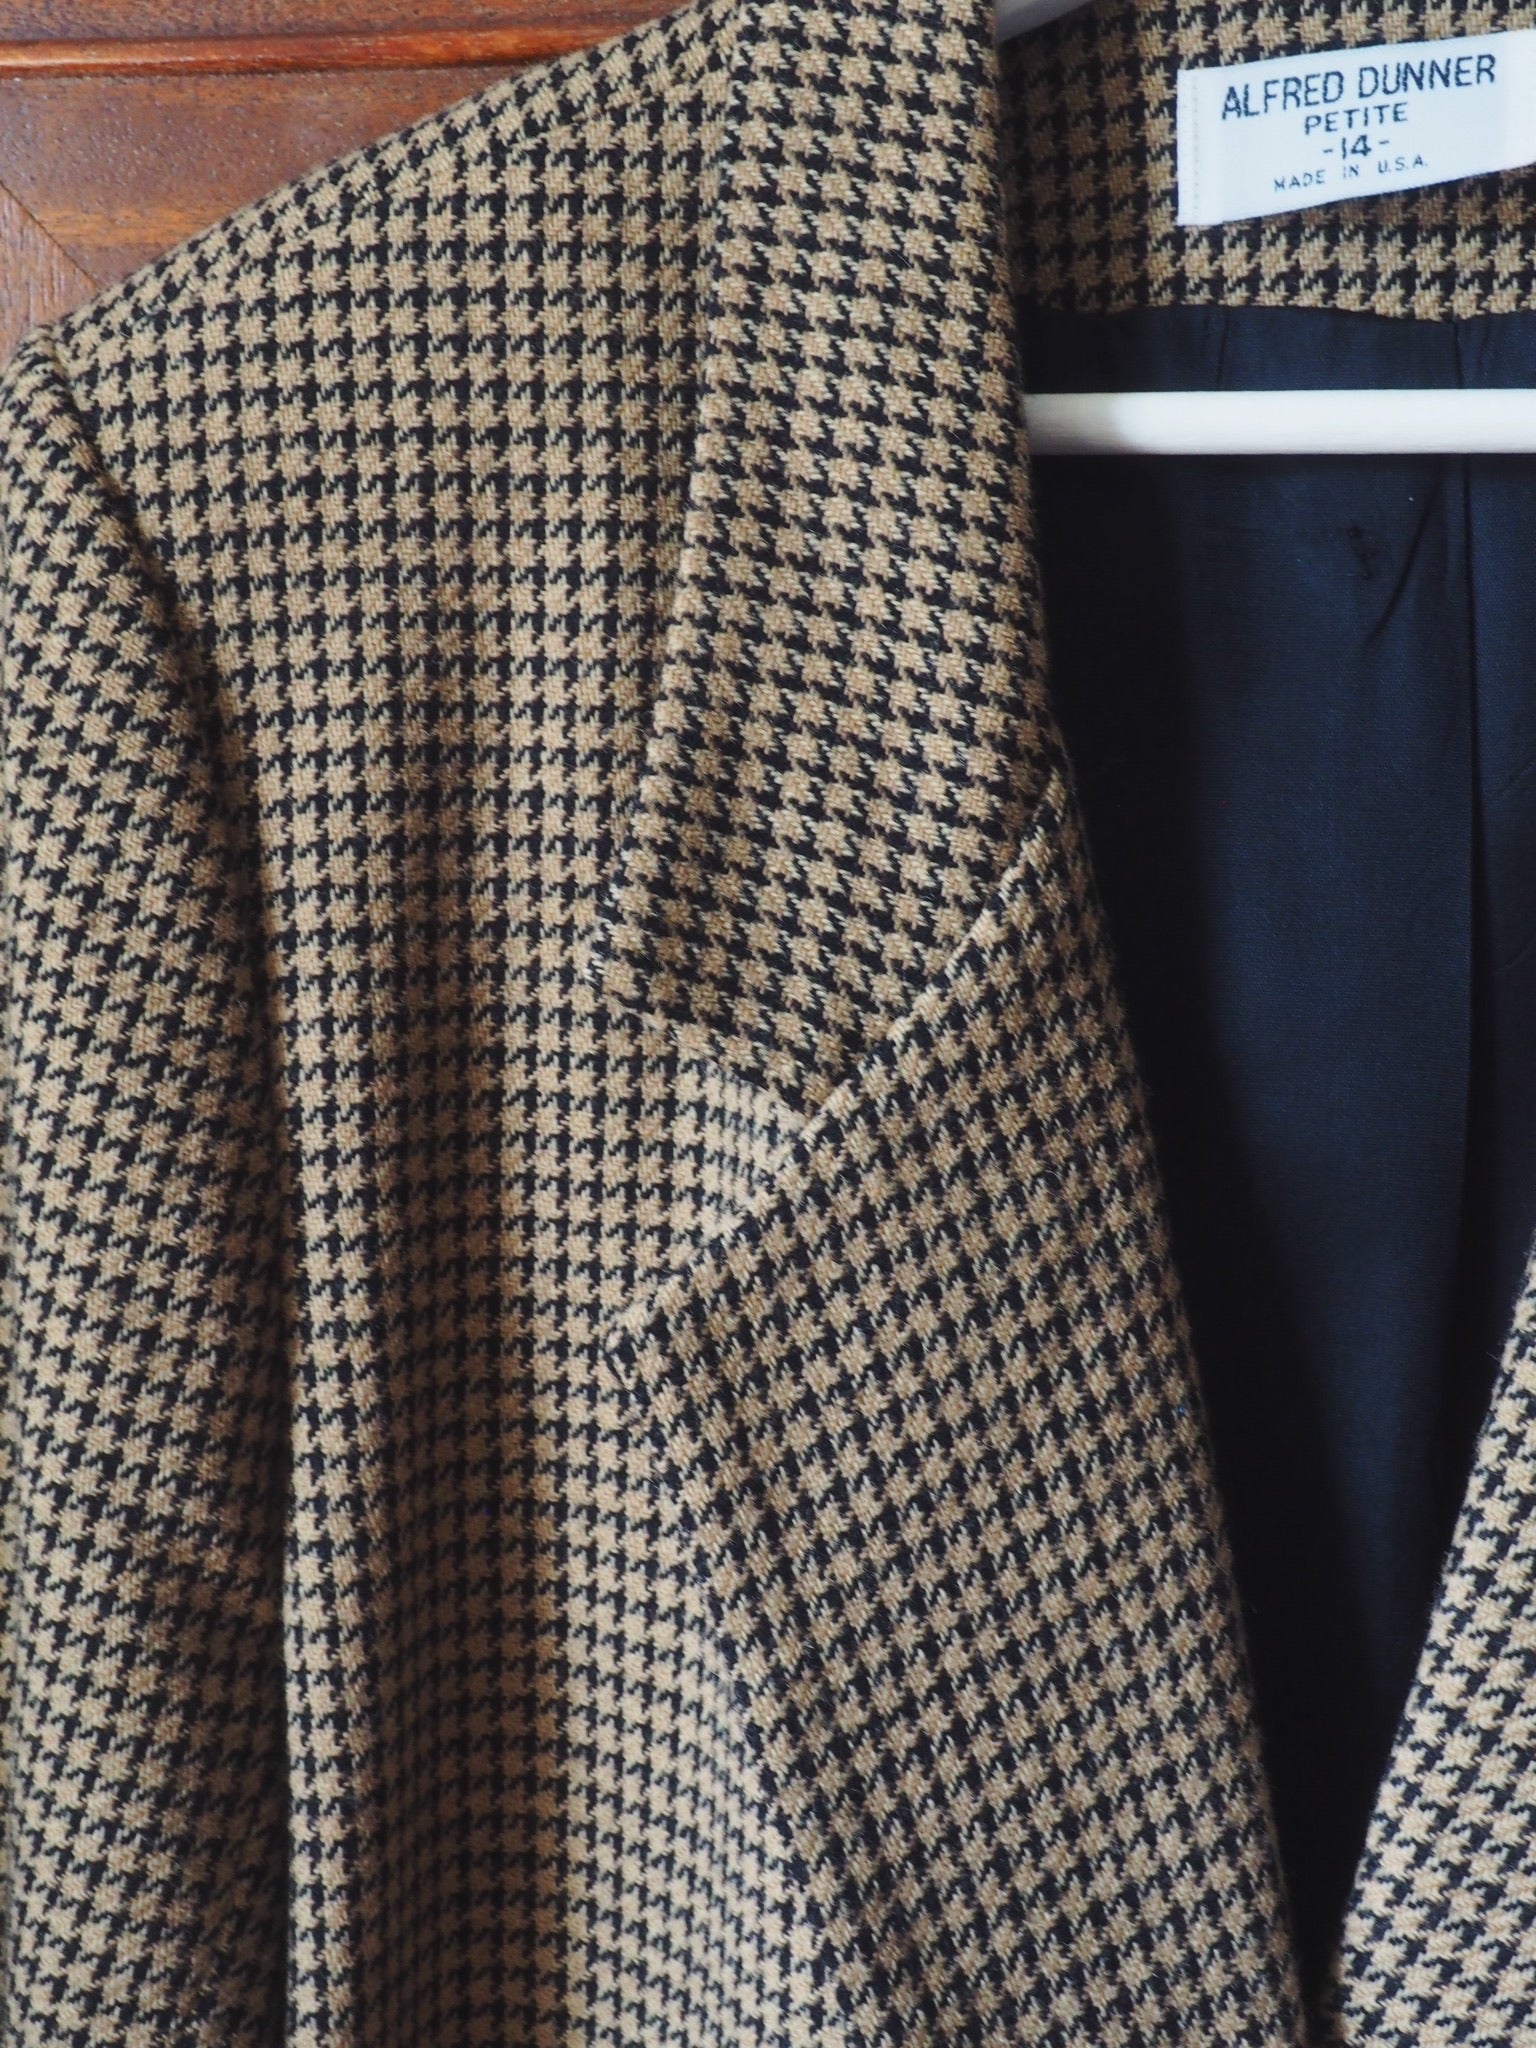 Vintage Made in the USA Houndstooth Blazer